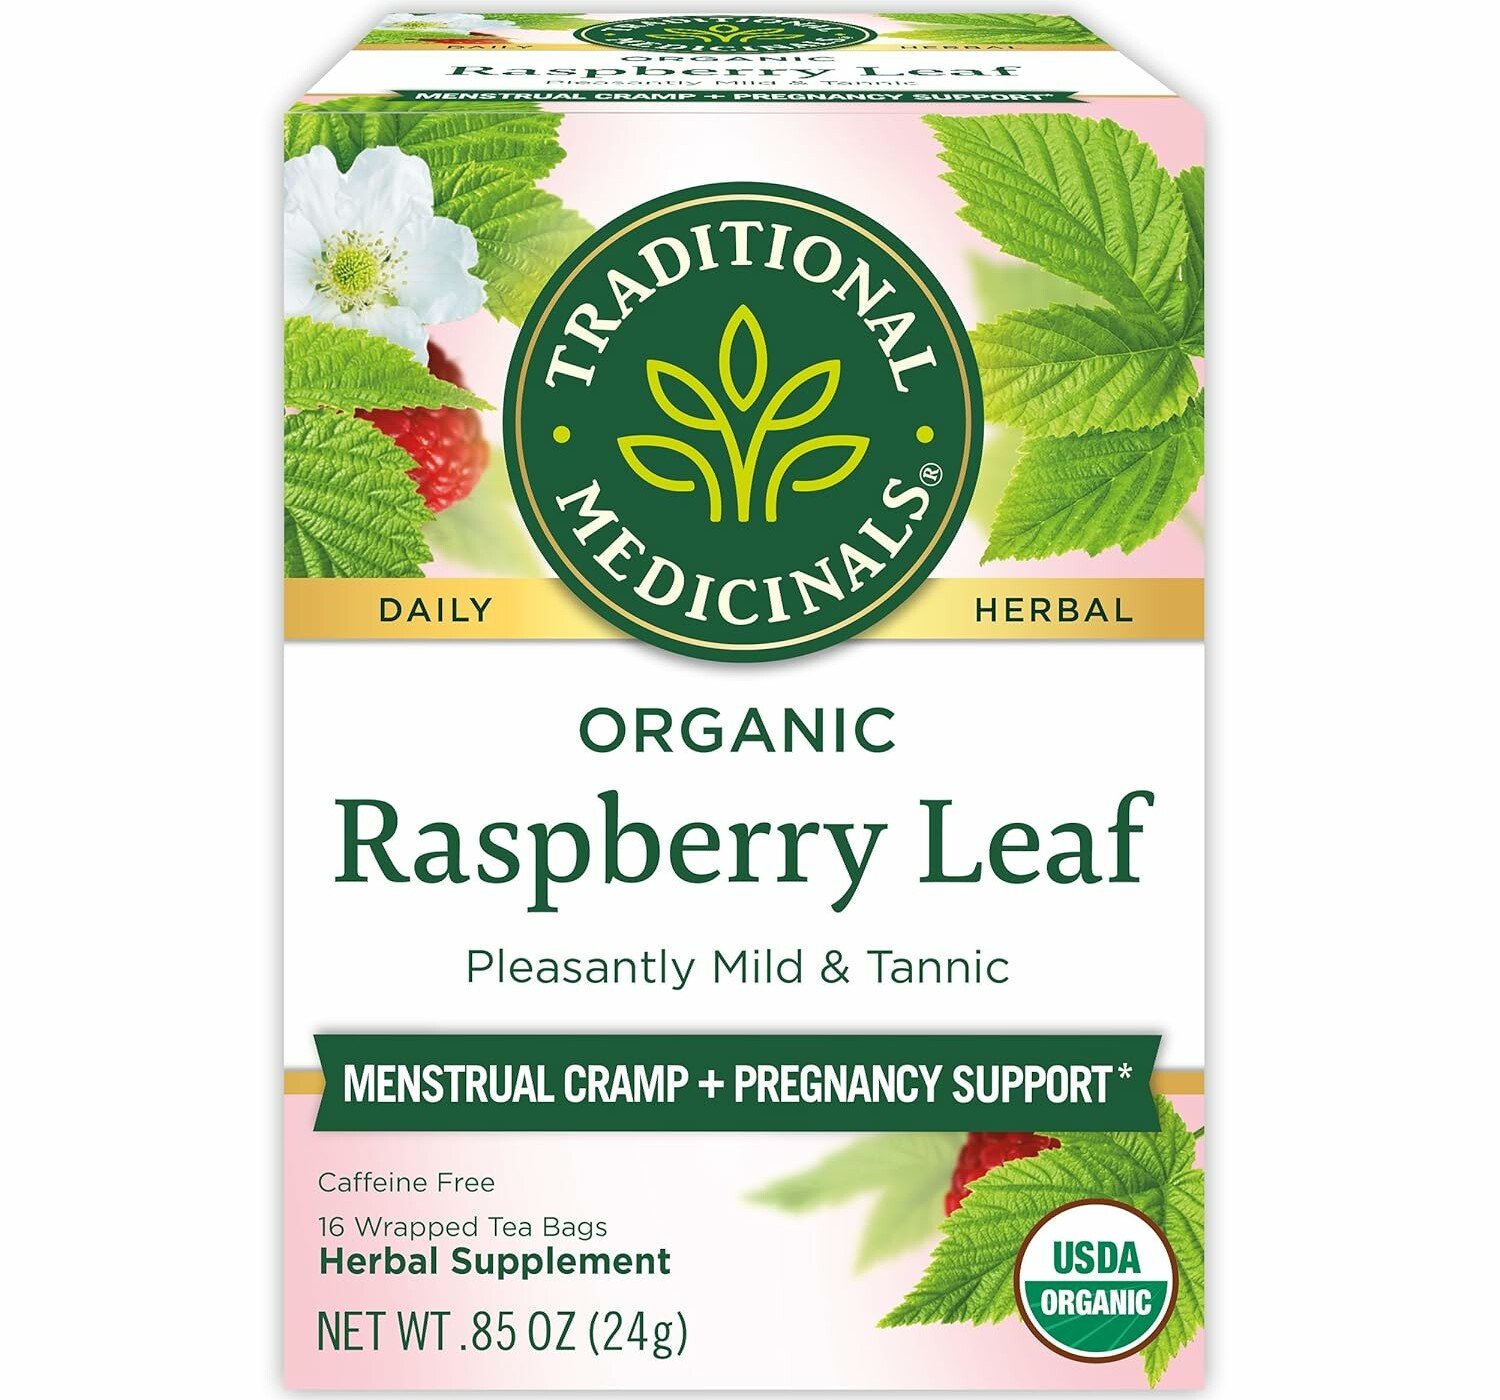 Traditional Medicinals Organic Raspberry Leaf Herbal Tea, Eases Menstrual Cramps & Supports Healthy Pregnancy, (Pack of 1) - 16 Tea Bags